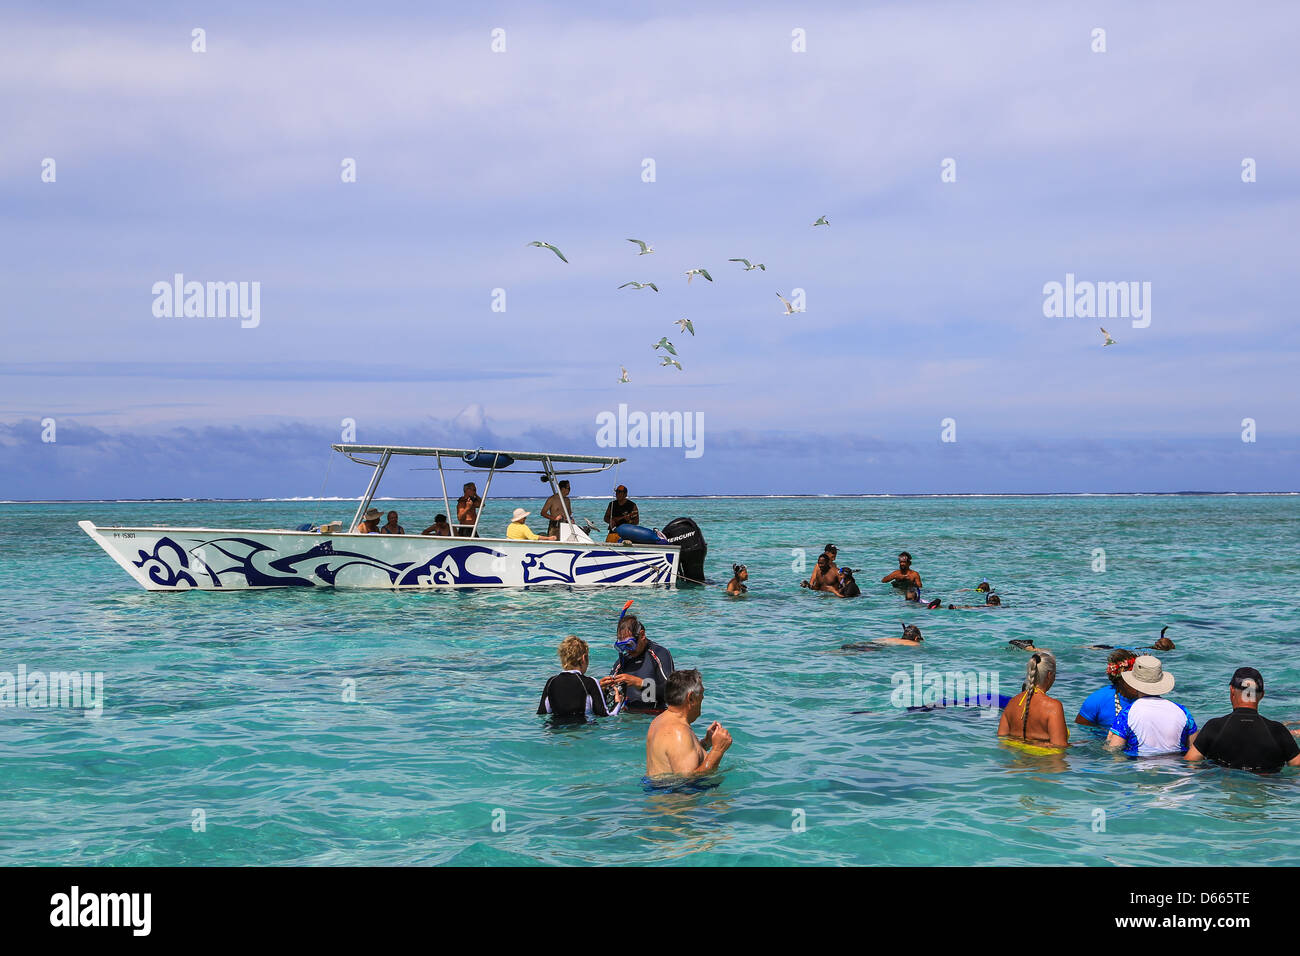 Tourists on a snorkeling excursion to view black tipped sharks and sting rays in the shallow waters of the Bora Bora lagoon. Stock Photo